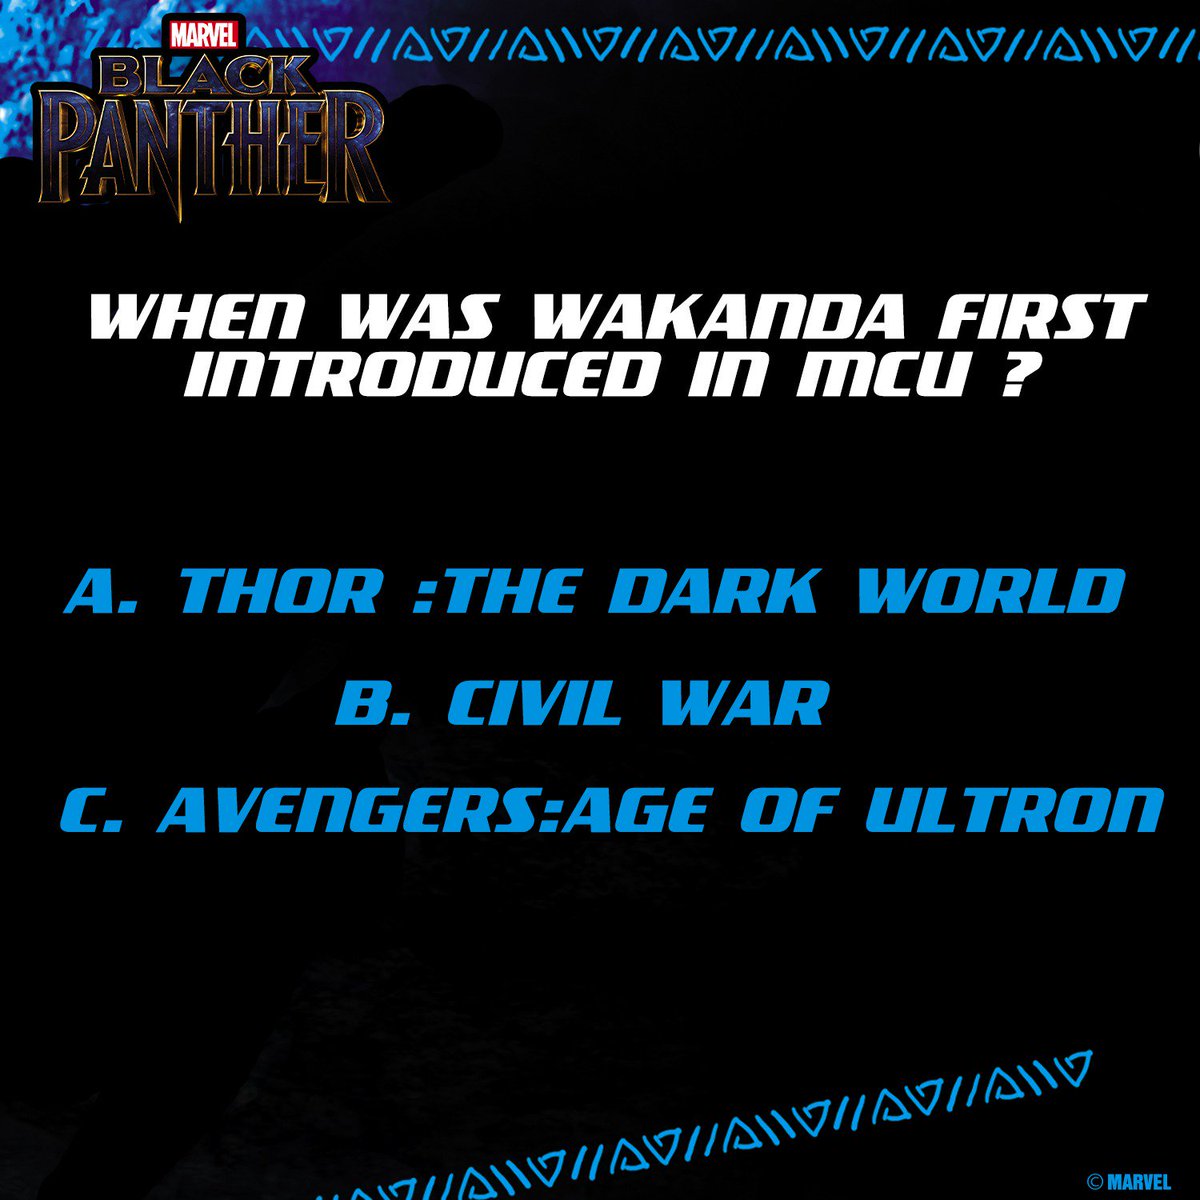 Silly Punter On Twitter Free Movie Ticket Trivia Quiz Question 3 3 Answer With Wakandaforever Sillypunter Like Re Tweet Trem And Condition Https T Co 8z4p5tgwbv Marvel Suprheros Movie Mcu Contestalert Contest Freemovieticket